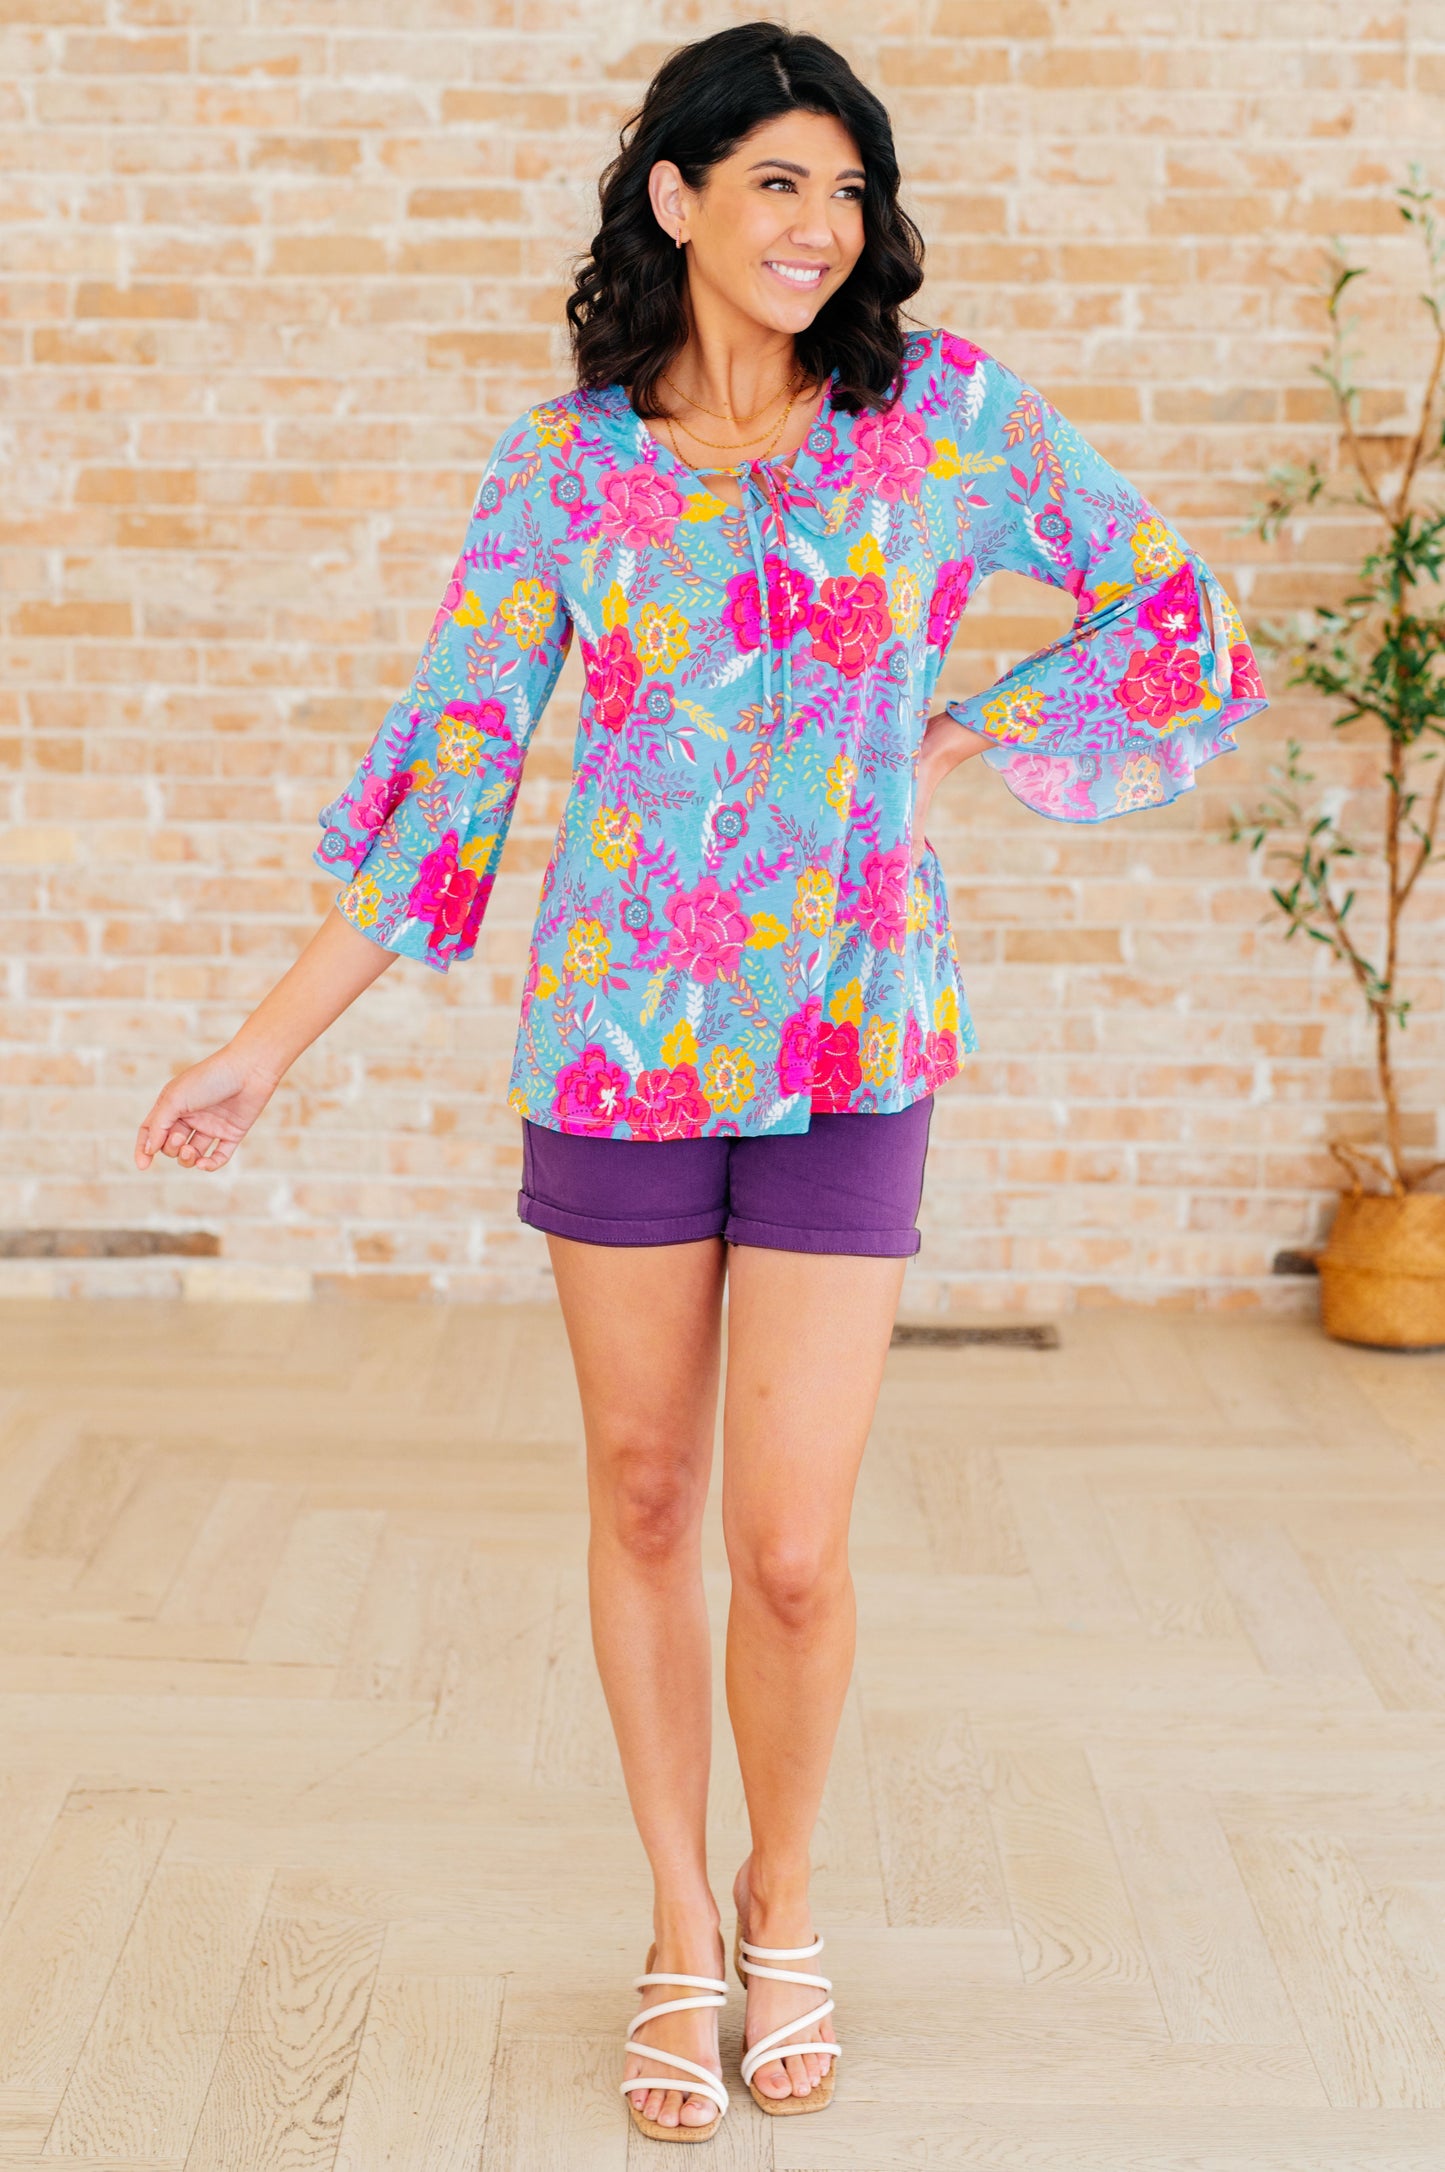 Bell Sleeve Top in Bright Blue Floral